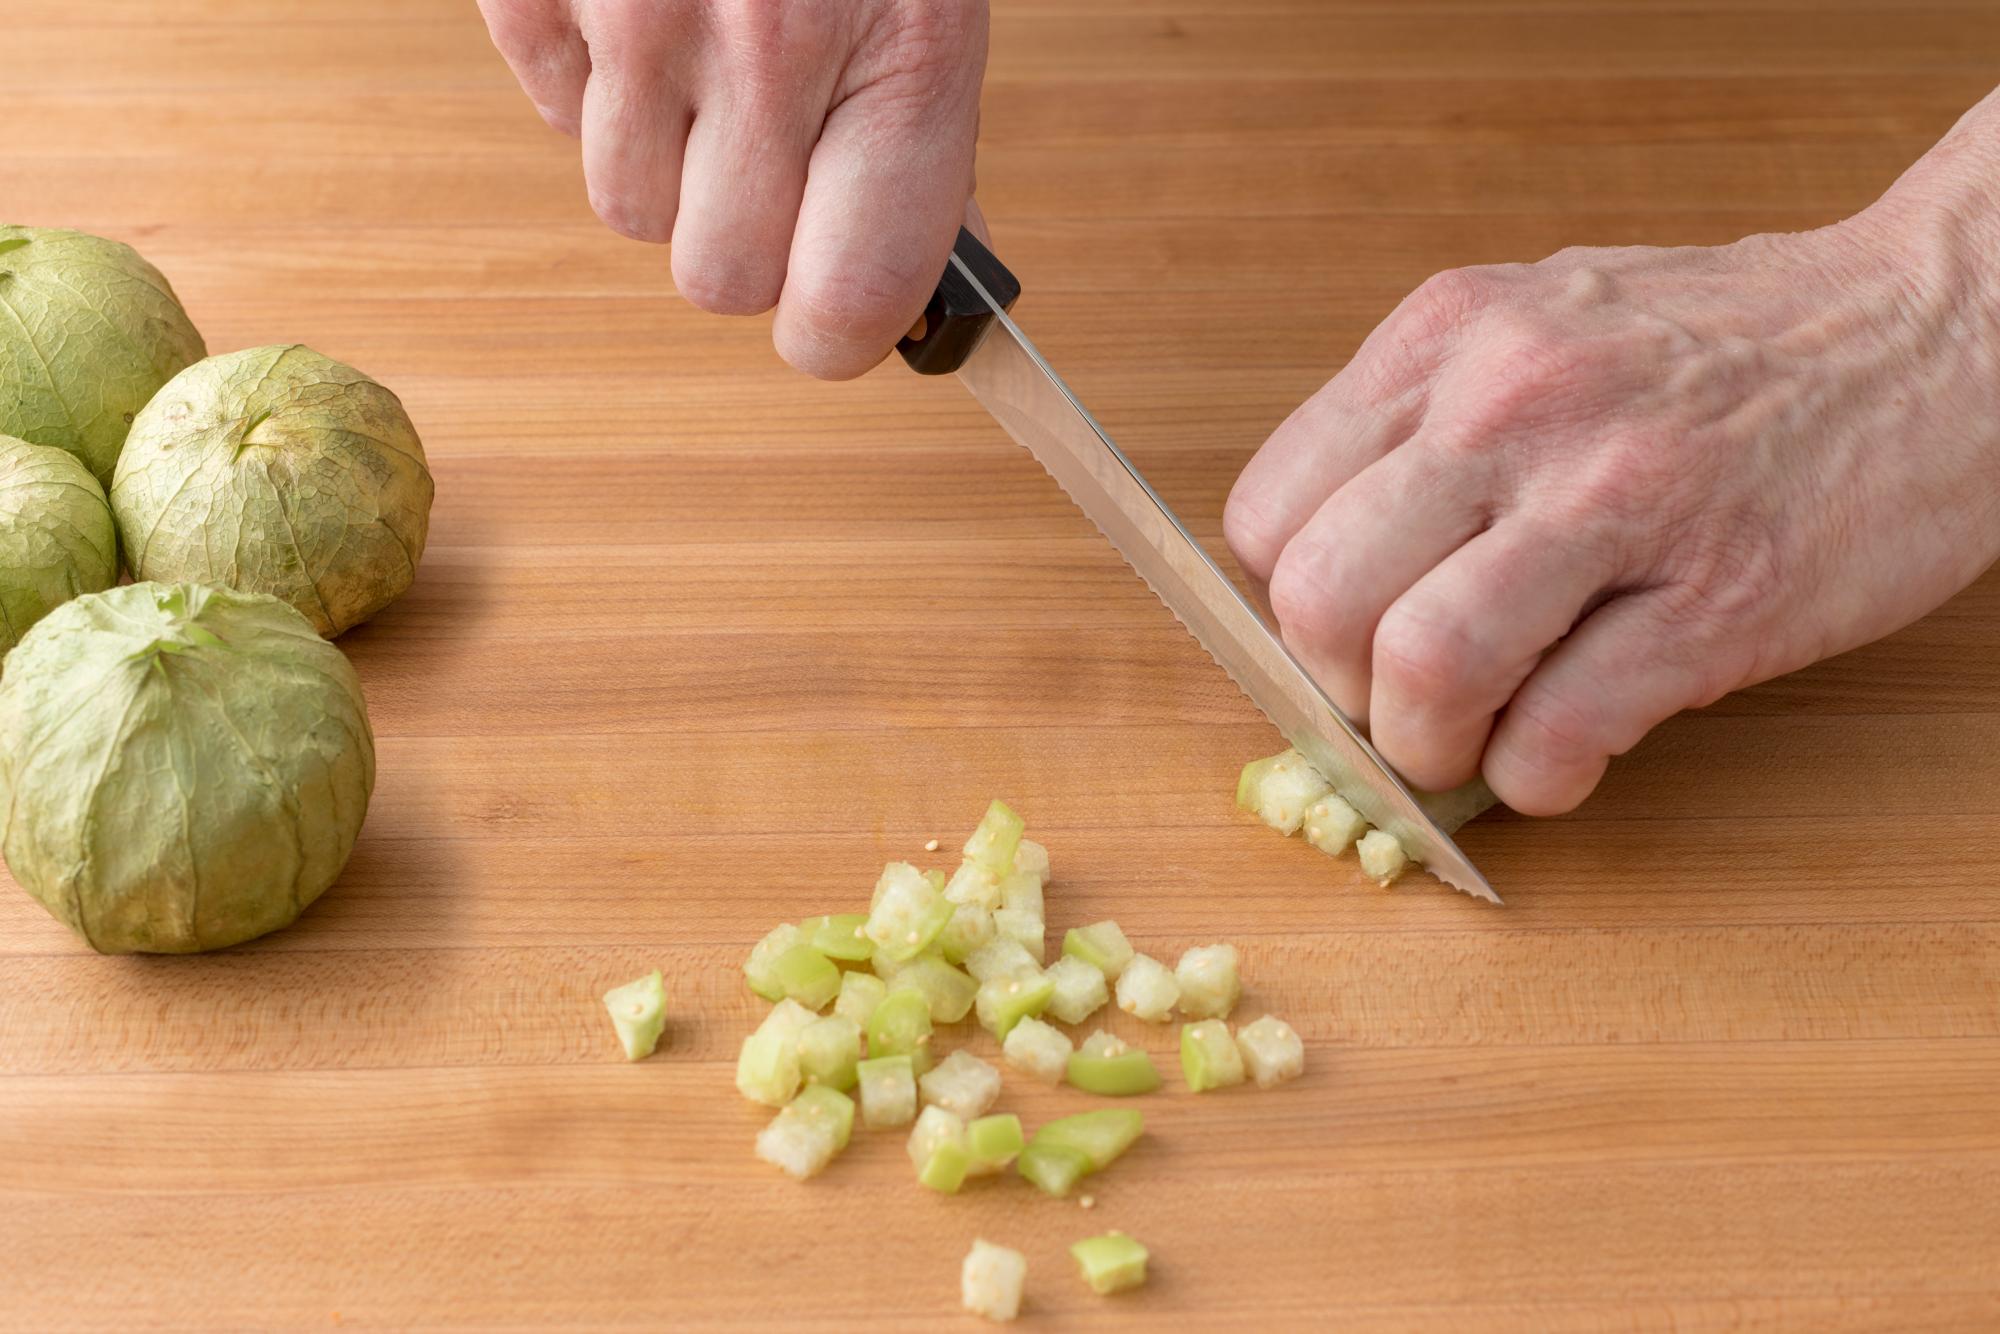 How to Dice a Tomatillo